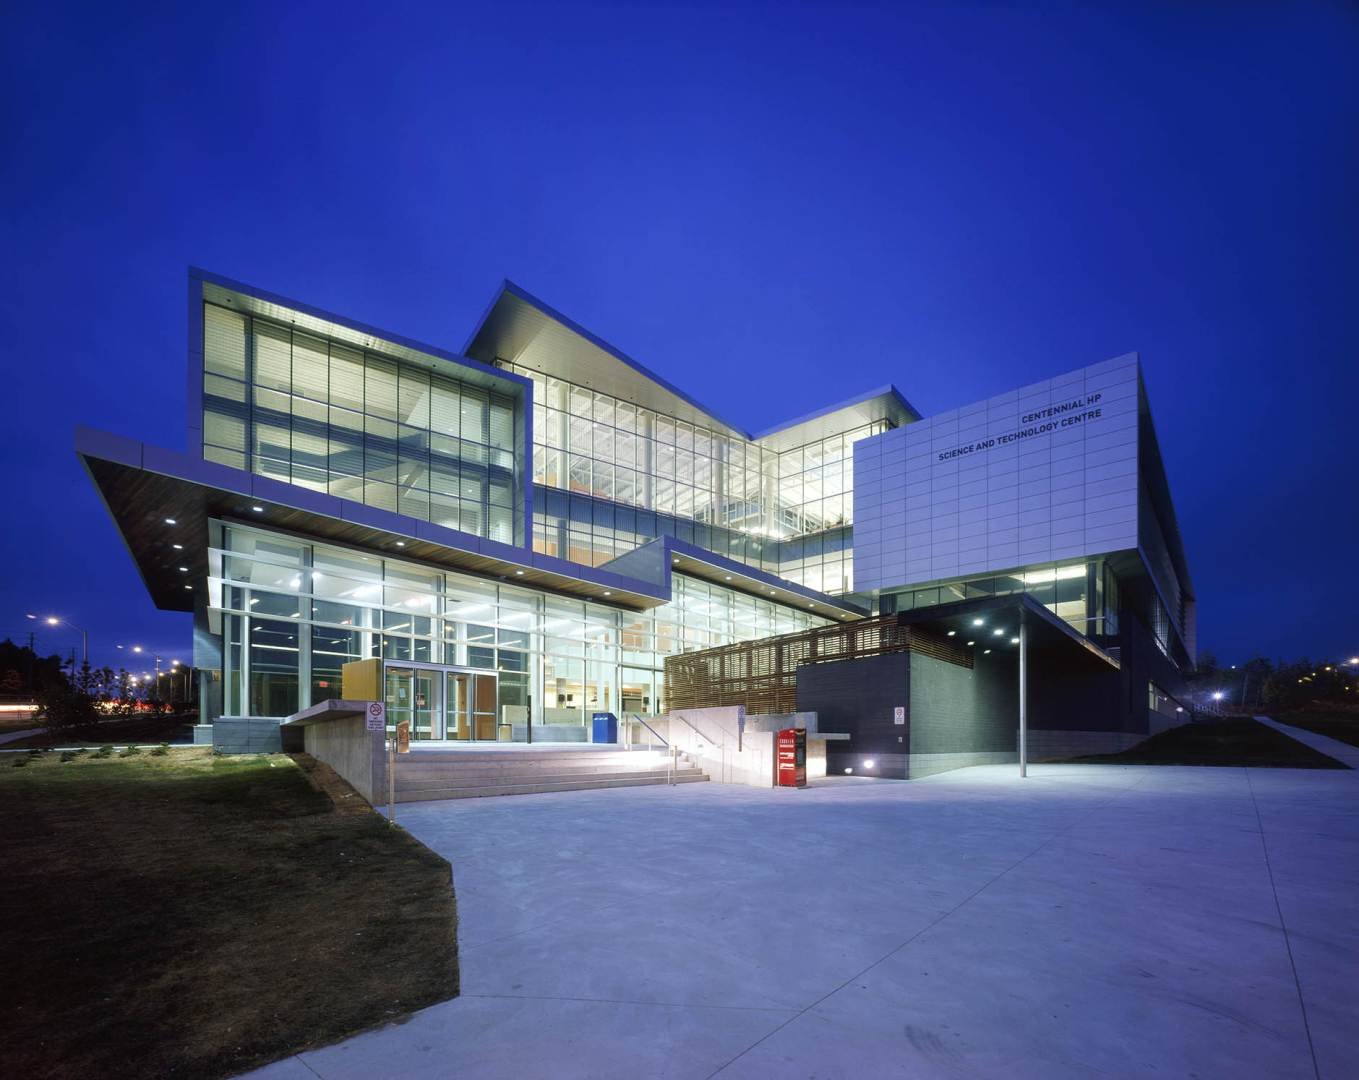 HP Centennial College Science and Technology Centre